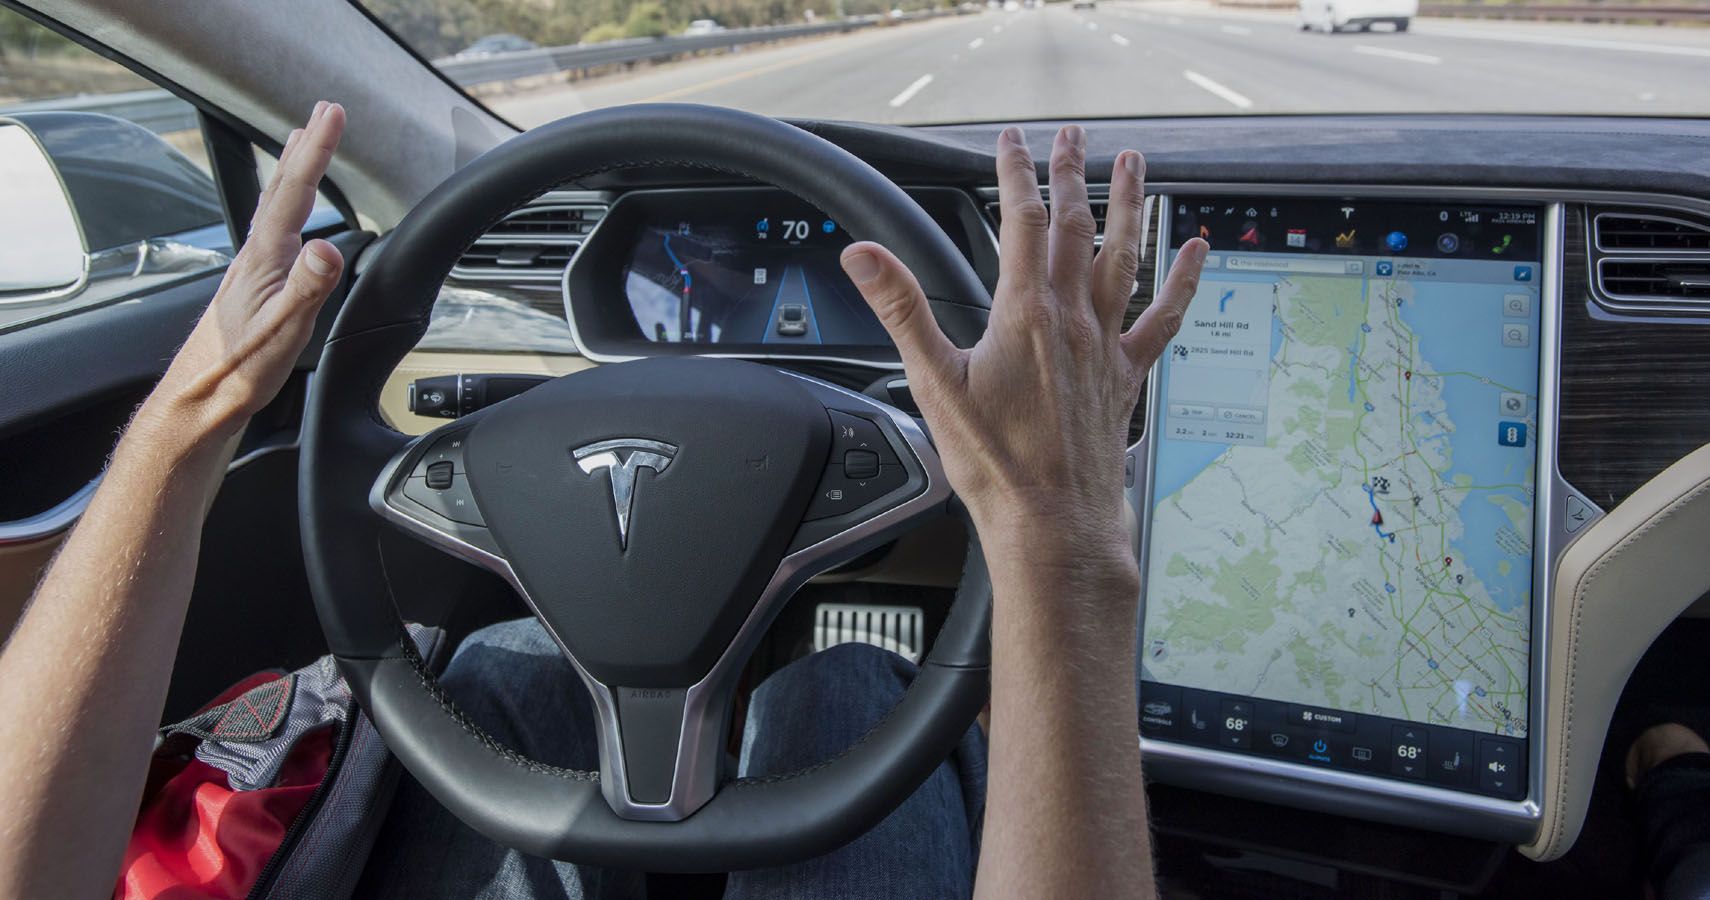 This Is Why Tesla's Self-Driving Car Dreams Are More A Nightmare